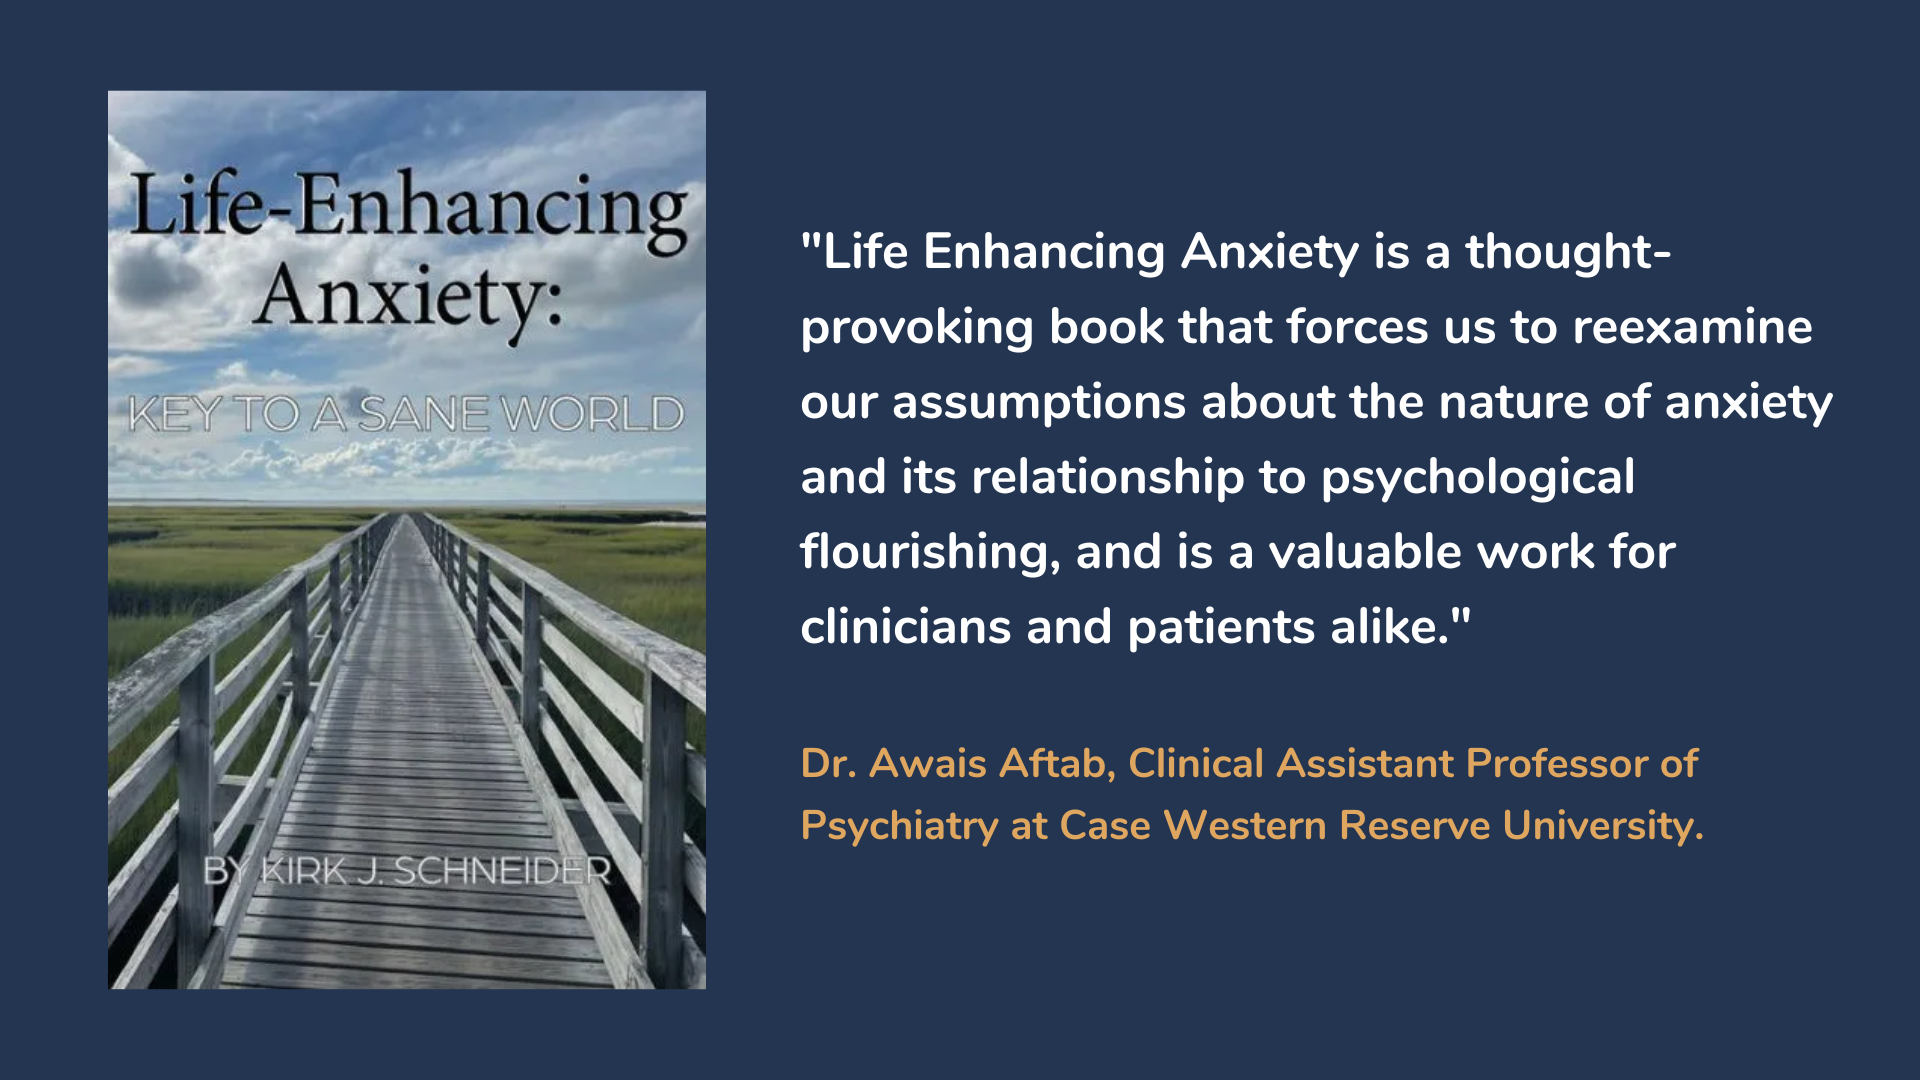 Life Enhancing Anxiety: Key to a Sane World. Book cover and description